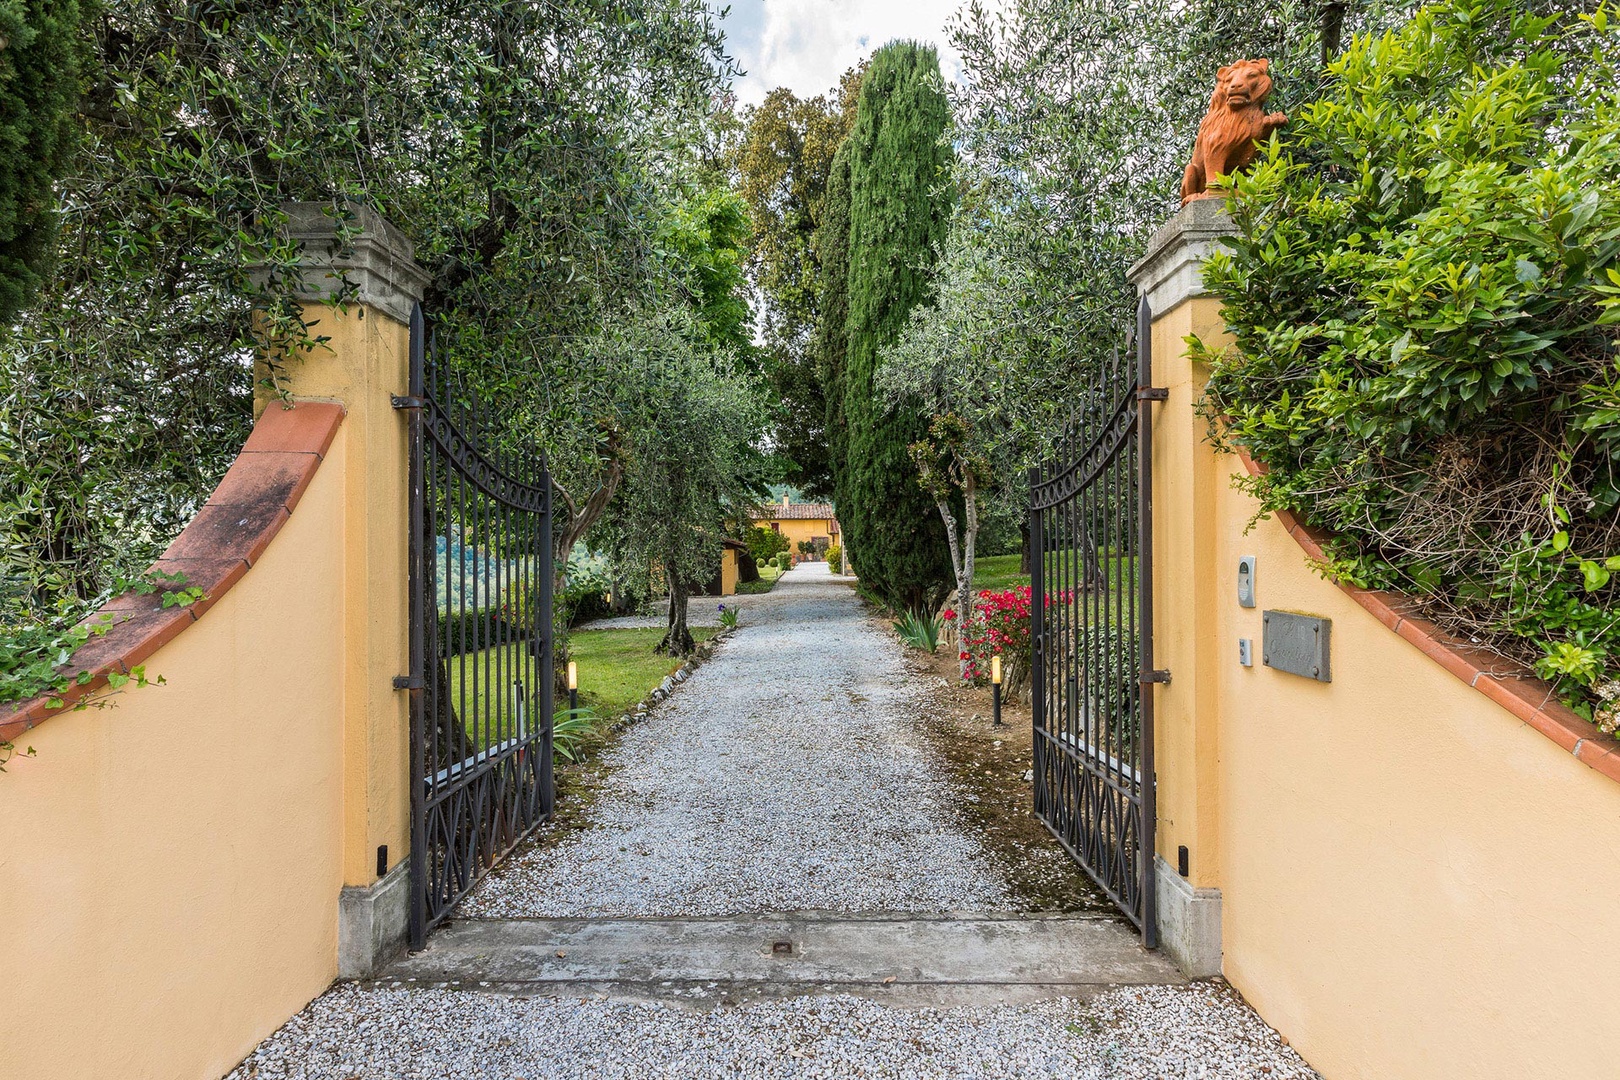 This private estate has a gate and is fenced.